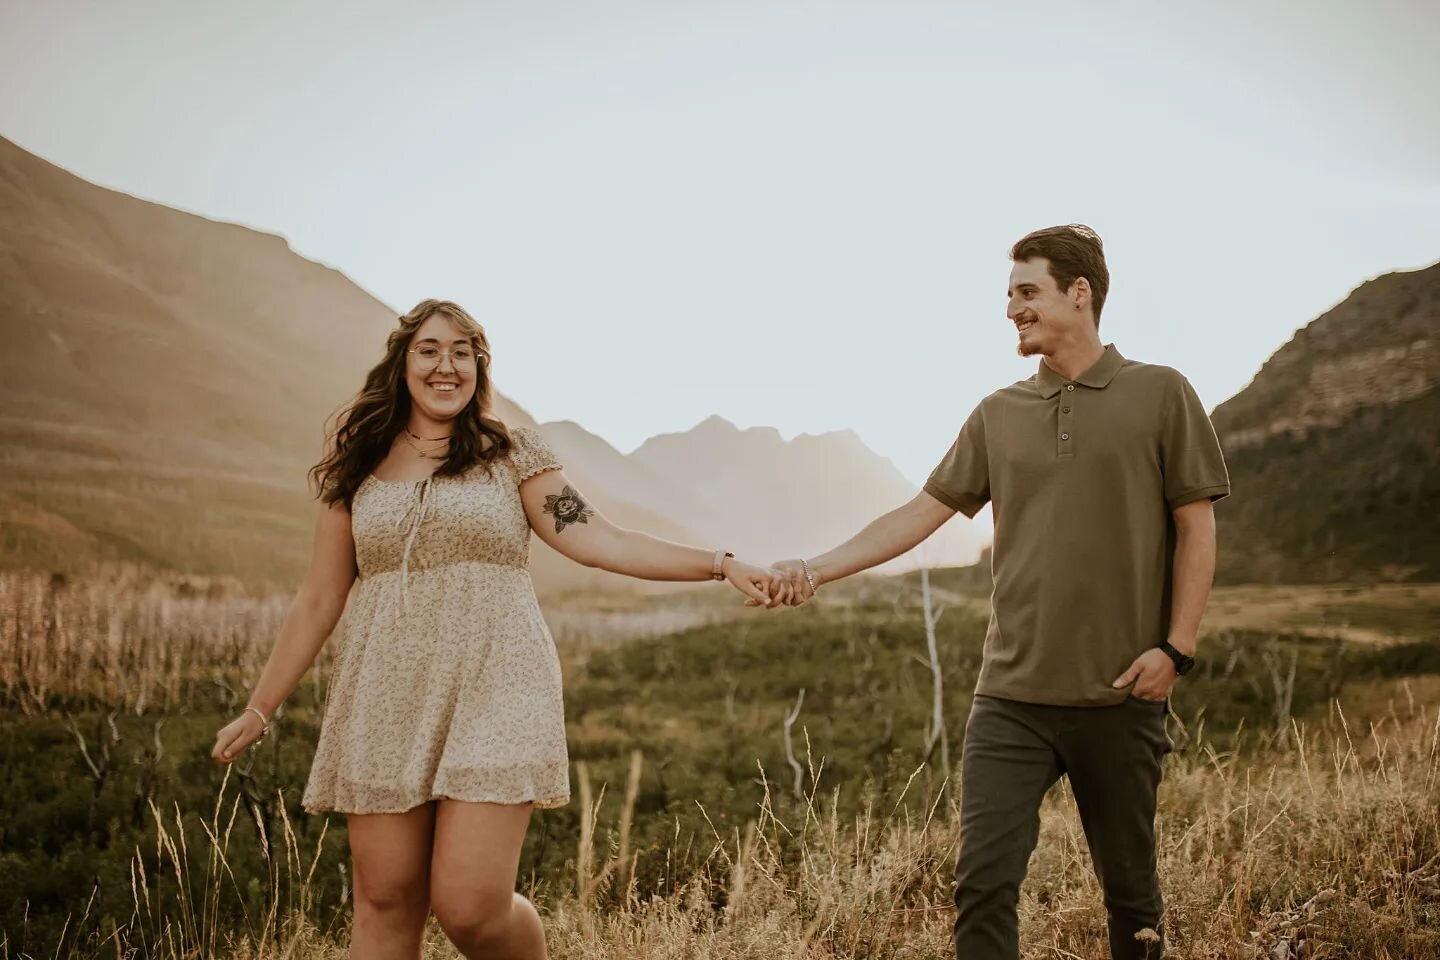 We ended with a water fight before walking back along the shore at dusk with twinkling lights shining on Waterton Lake.

Laughing and edventuring with your love, all while it's captured in a beautiful and authentic way is the best way to hold onto th